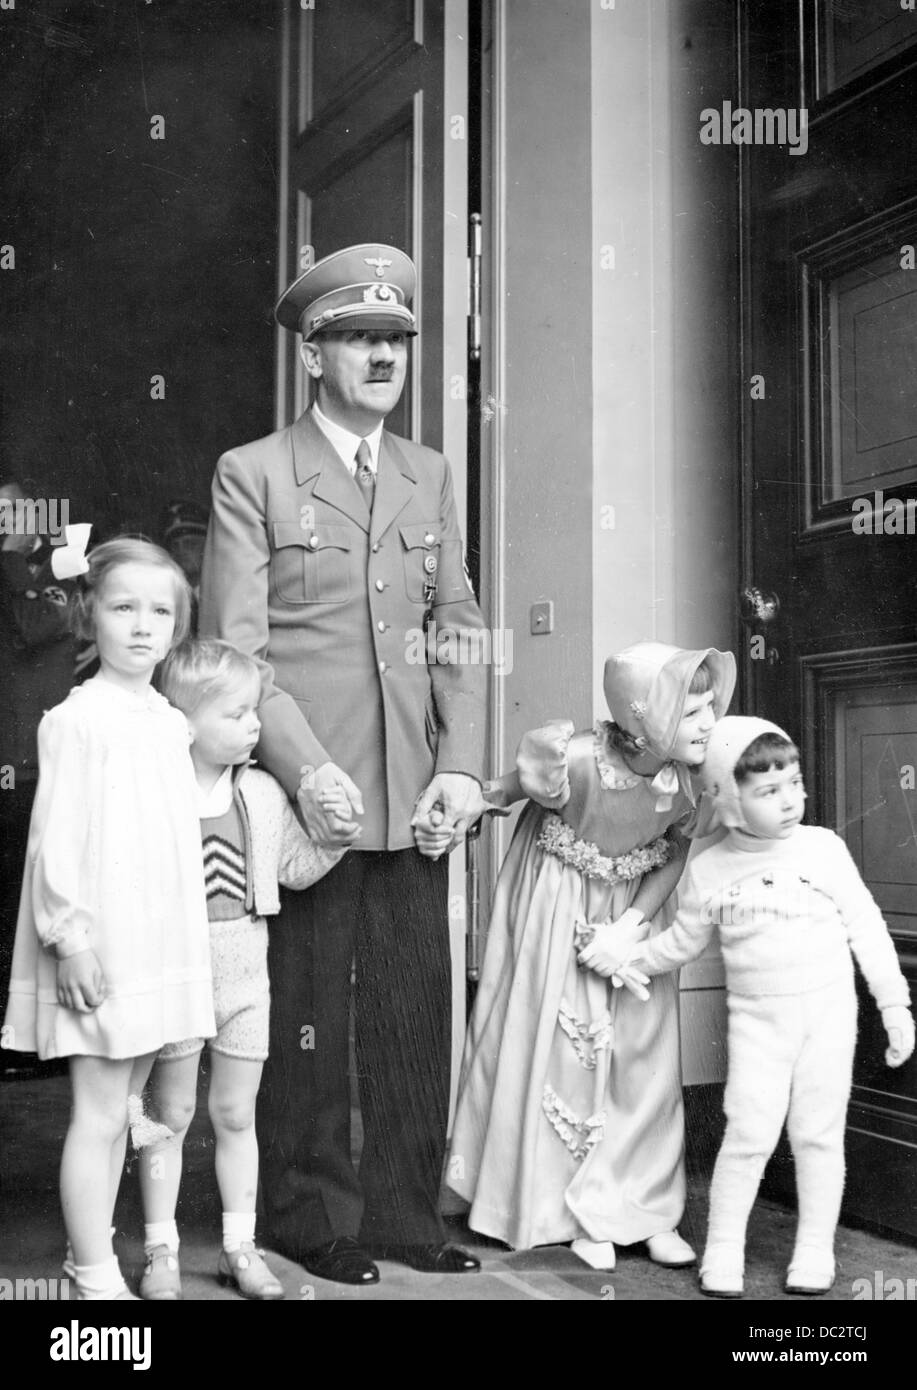 The Nazi Propaganda! image shows Adolf Hitler on his 50th birthday with children, who congratulated him, at the entrance of the Neue Reich Chancellery in Berlin, Germany, 20 April 1939. Fotoarchiv für Zeitgeschichte Stock Photo